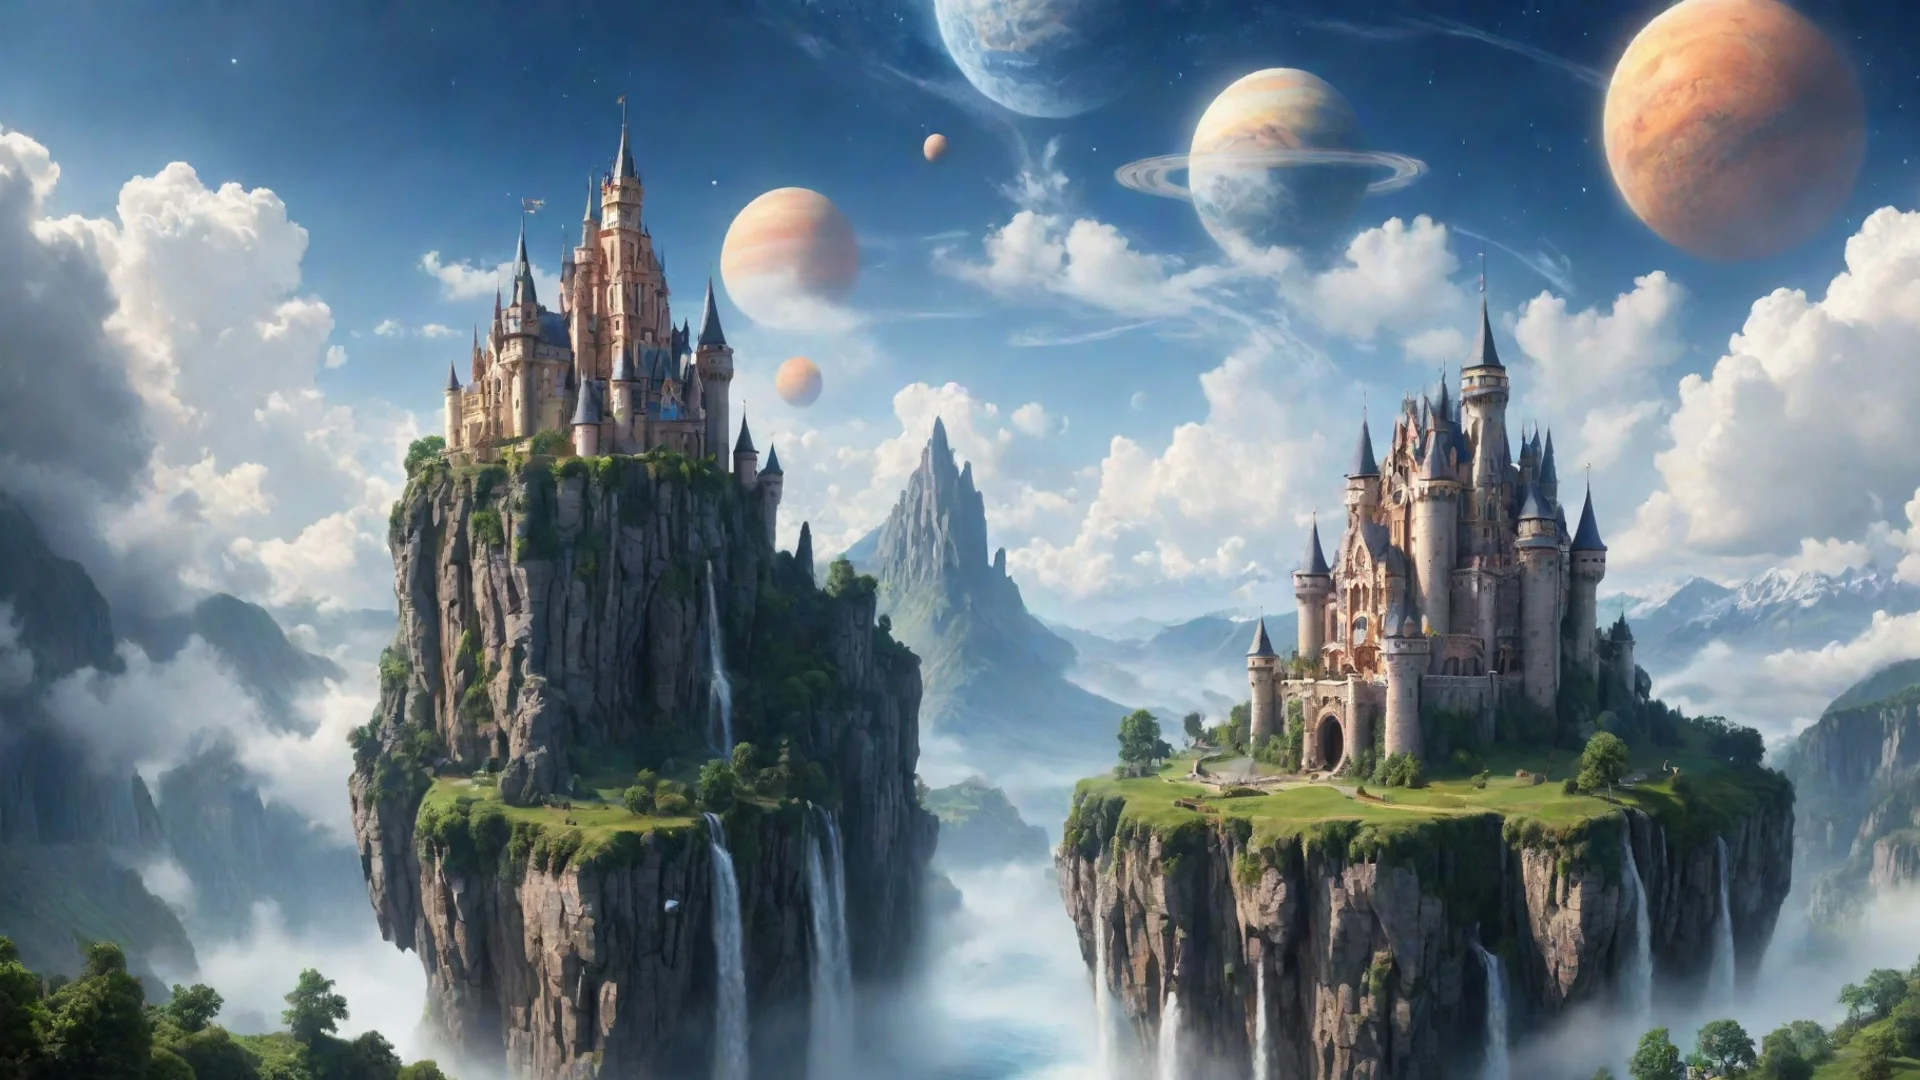 aiamazing logo saying stable diffusion   peaceful castle in sky epic floating castle on floating cliffs with waterfalls down beautiful sky with saturn planets awesome portrait 2 wide